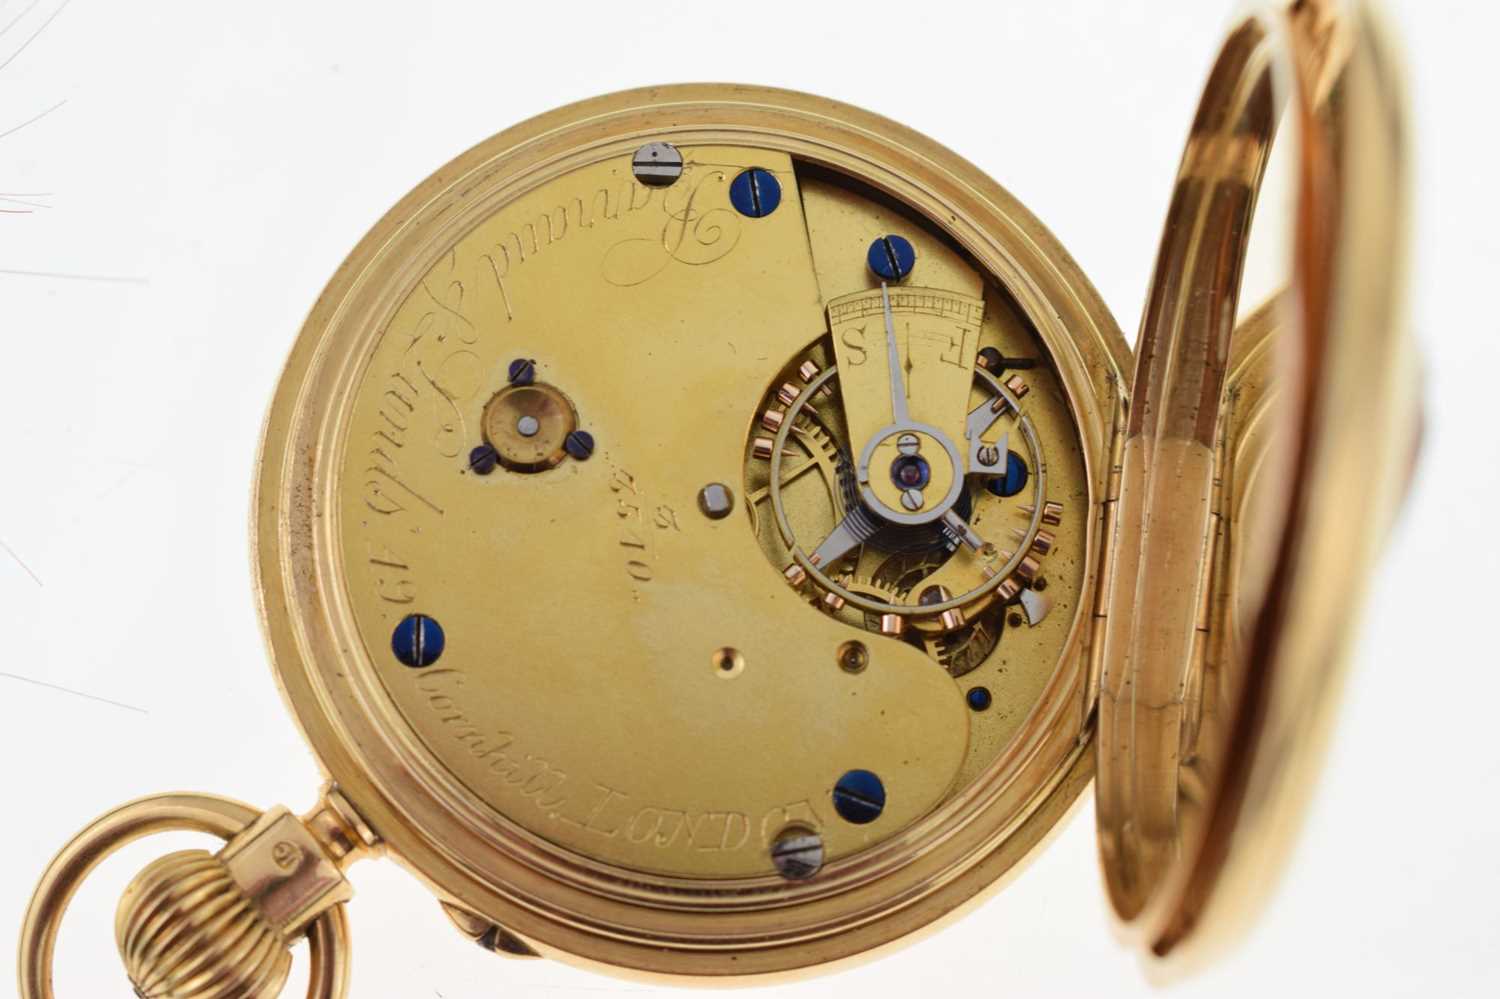 Barraud & Lunds, London - 18ct gold hunter pocket watch - Image 12 of 12